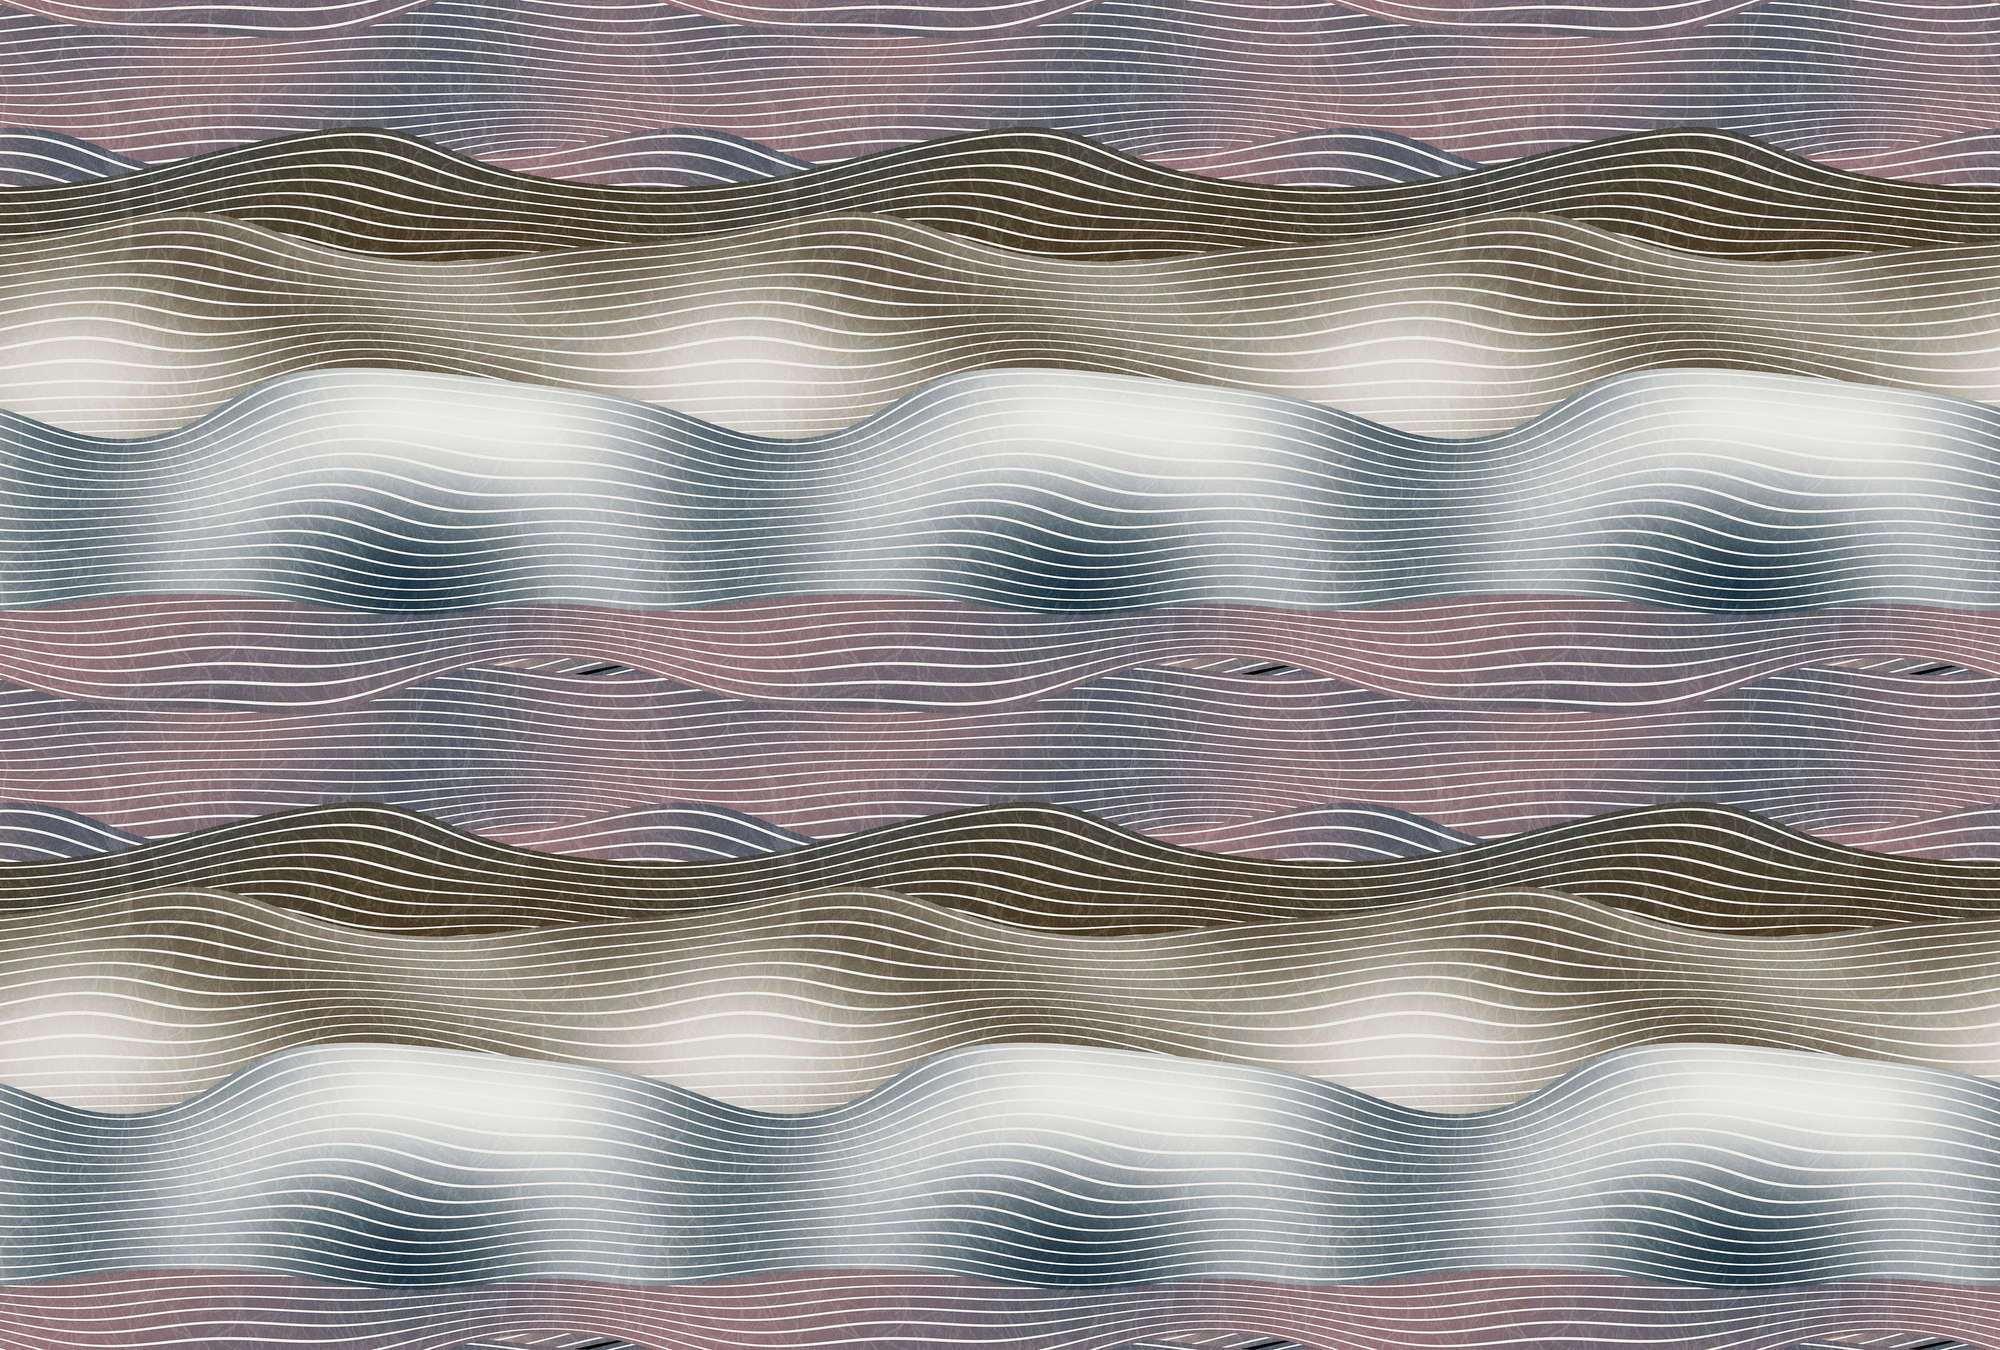             Space 2 - retro wall mural space design wave pattern
        